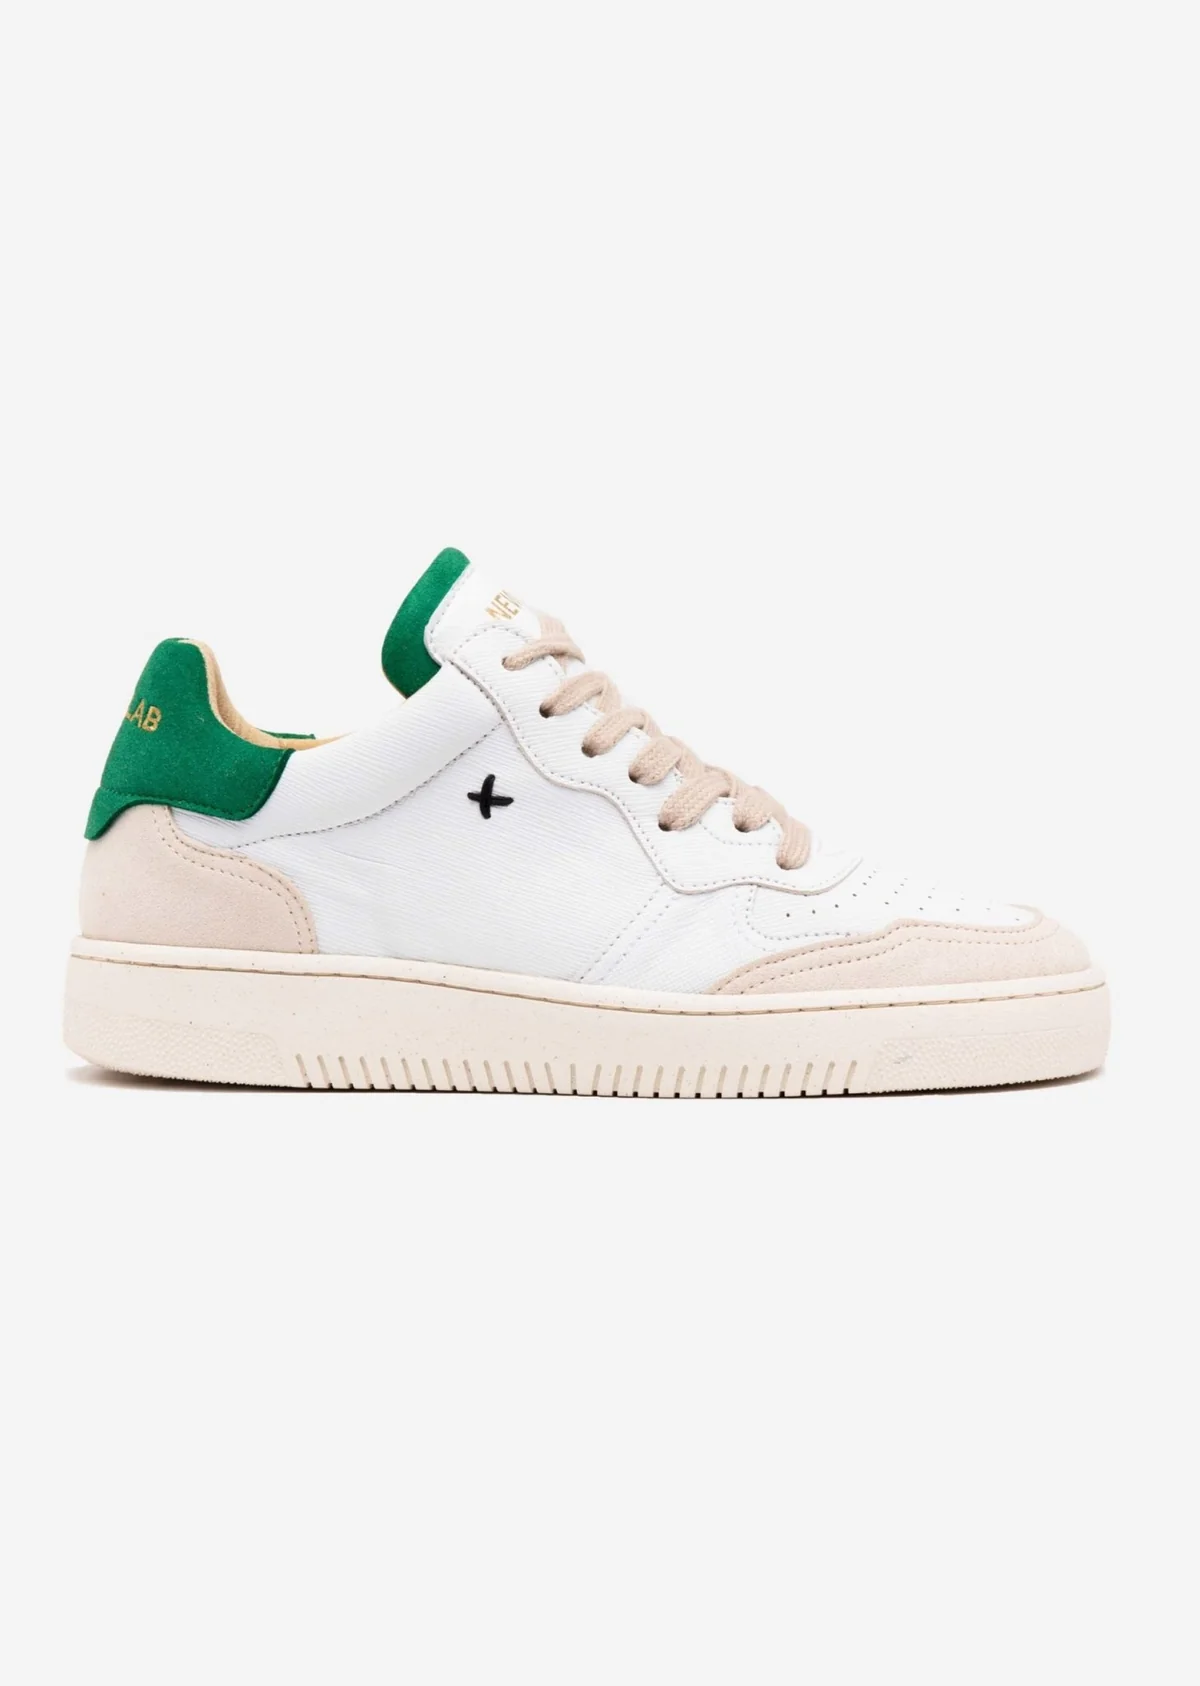 NEWLAB Sneakers NL11 White / Green 